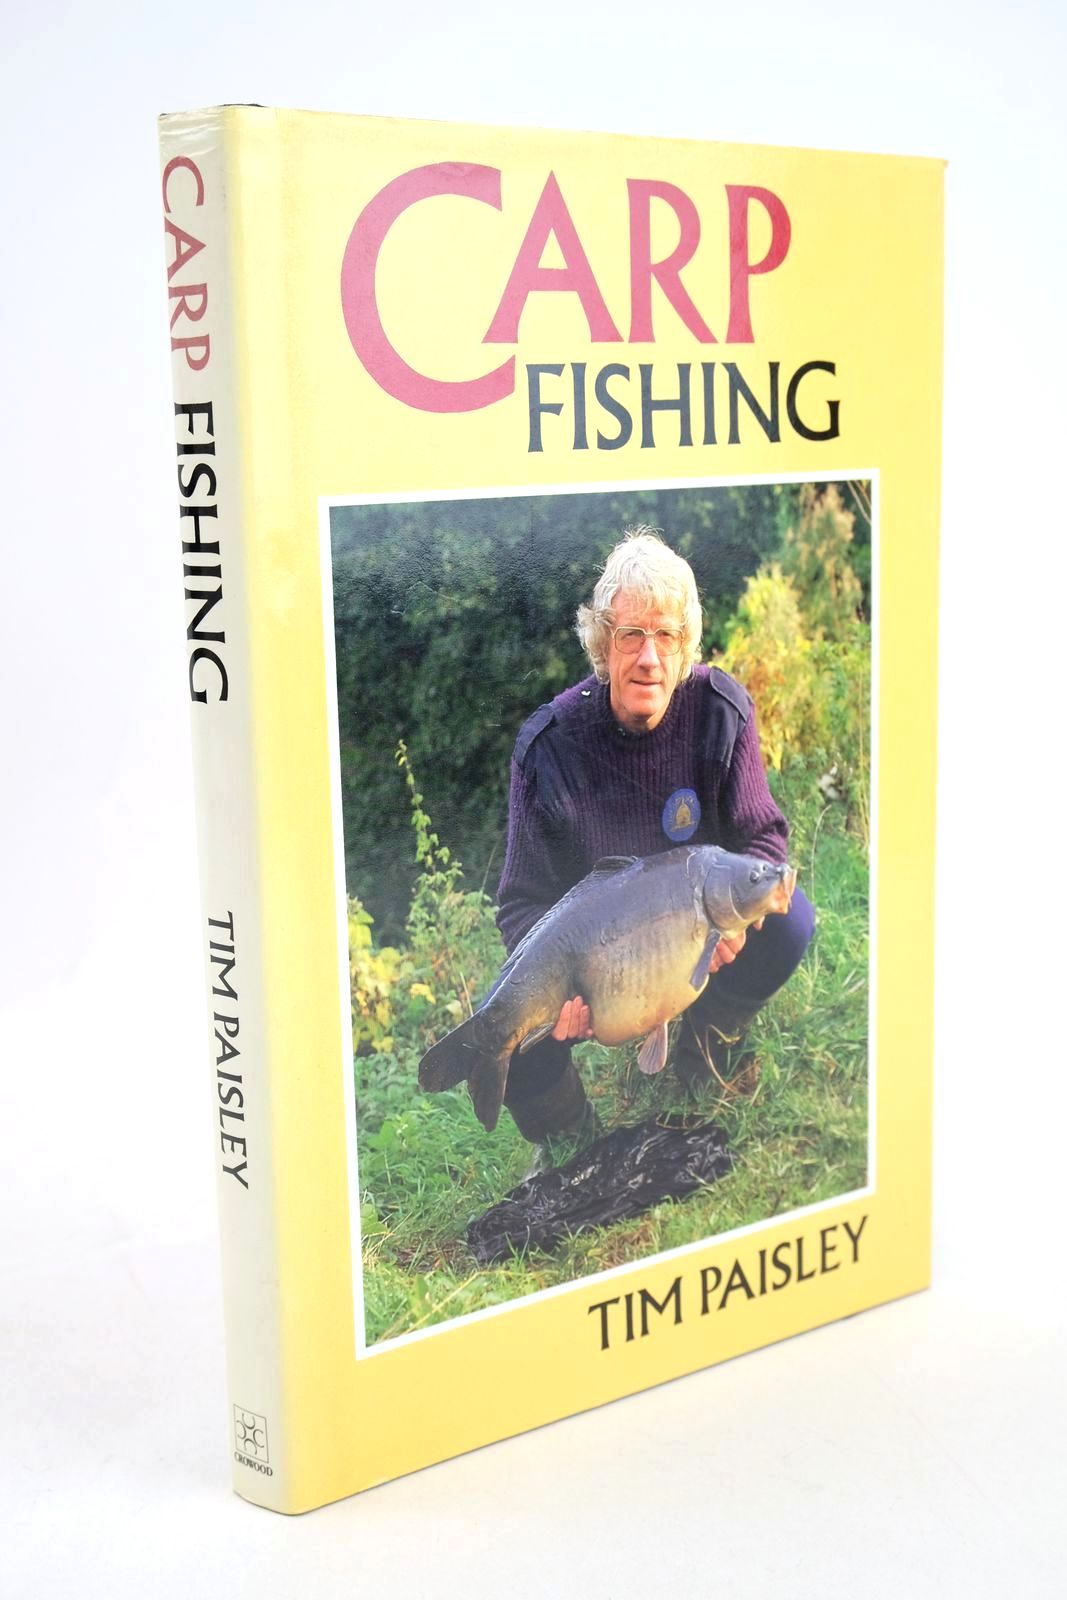 Photo of CARP FISHING written by Paisley, Tim published by The Crowood Press (STOCK CODE: 1327611)  for sale by Stella & Rose's Books